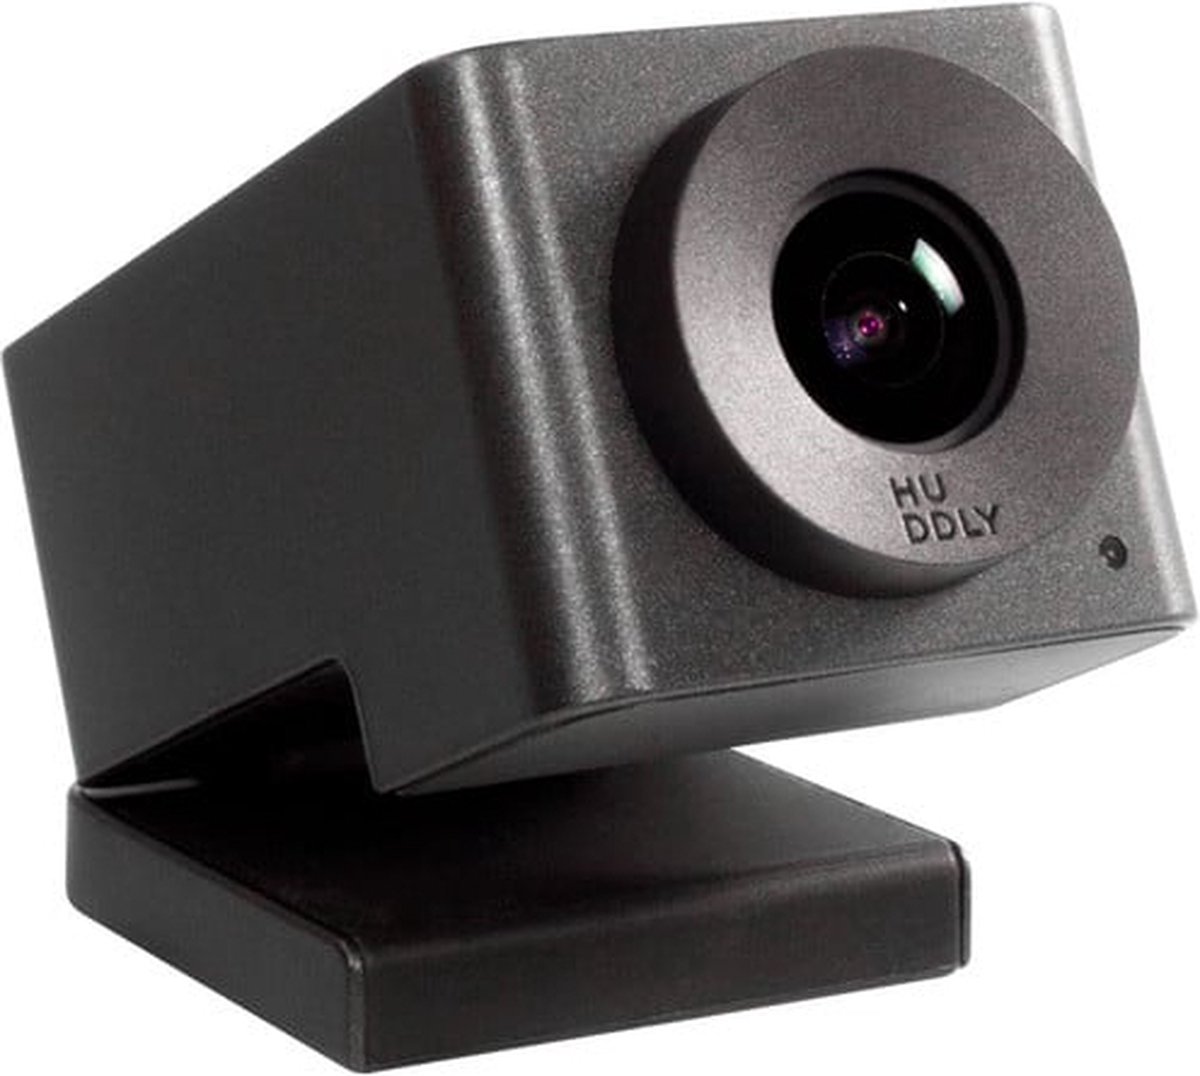 Huddly GO - Work from home kit - conference camera - colour - 16 MP - 720p - USB 3.0